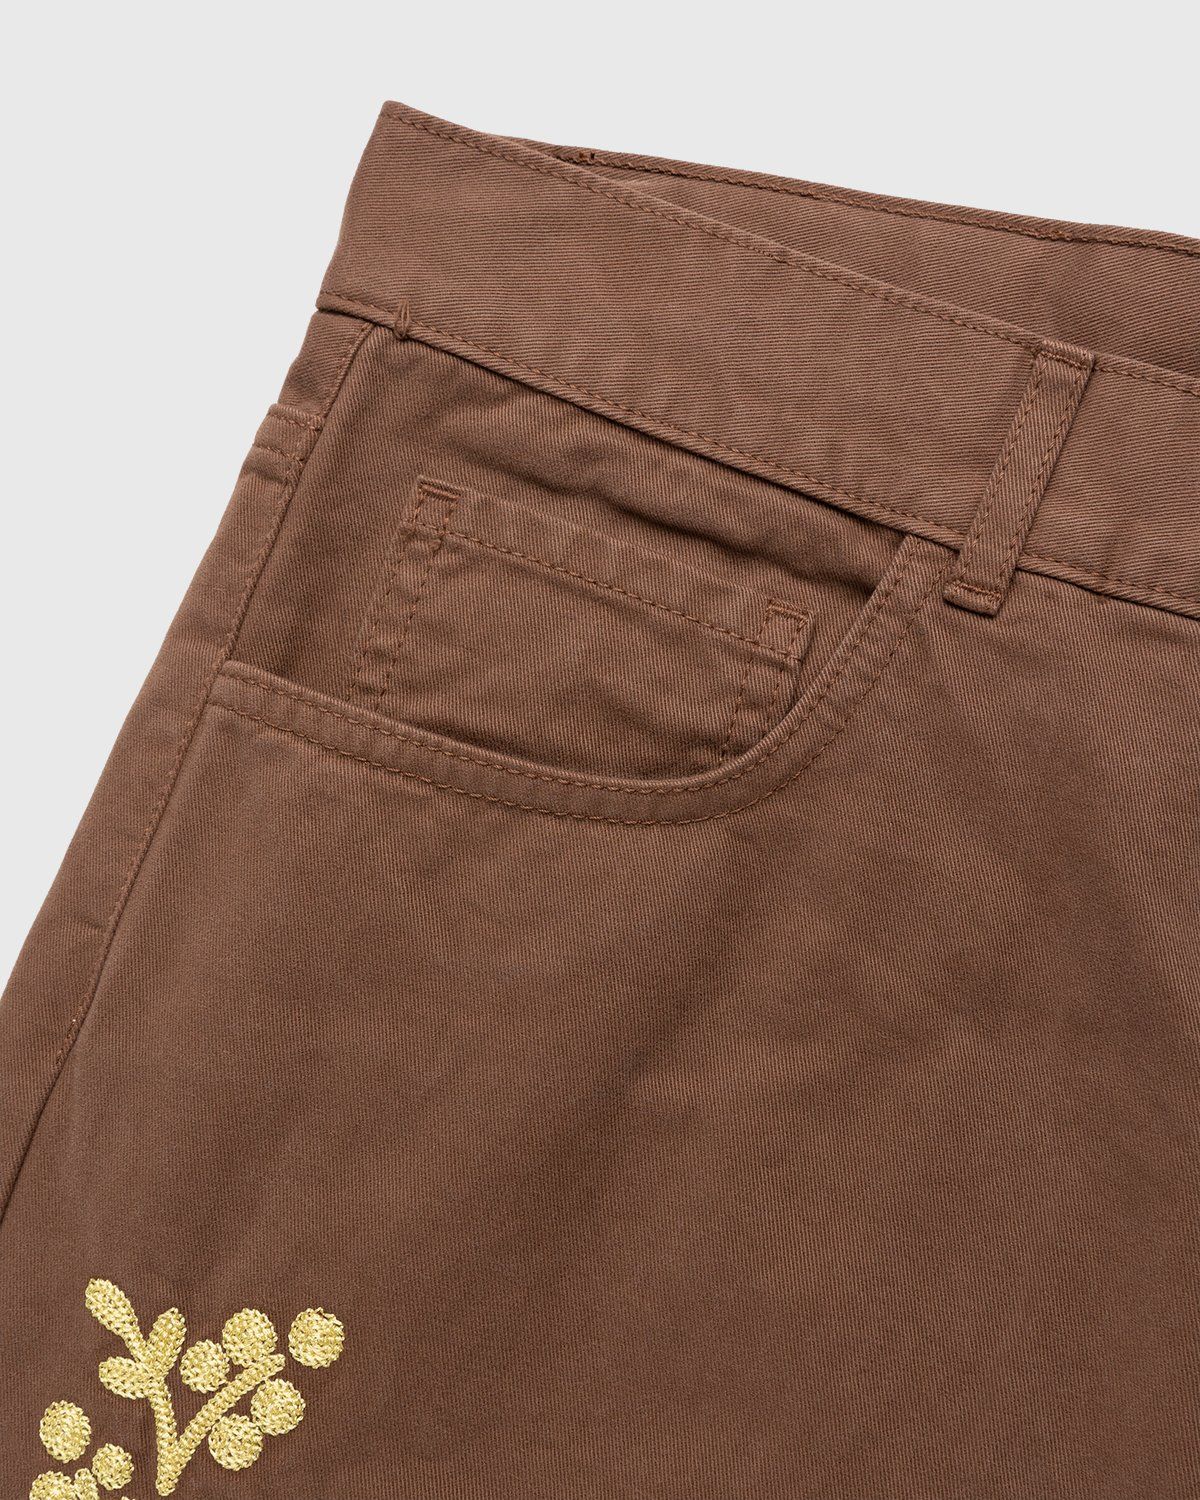 Carne Bollente – The Back Bump Trouser Brown - Image 8